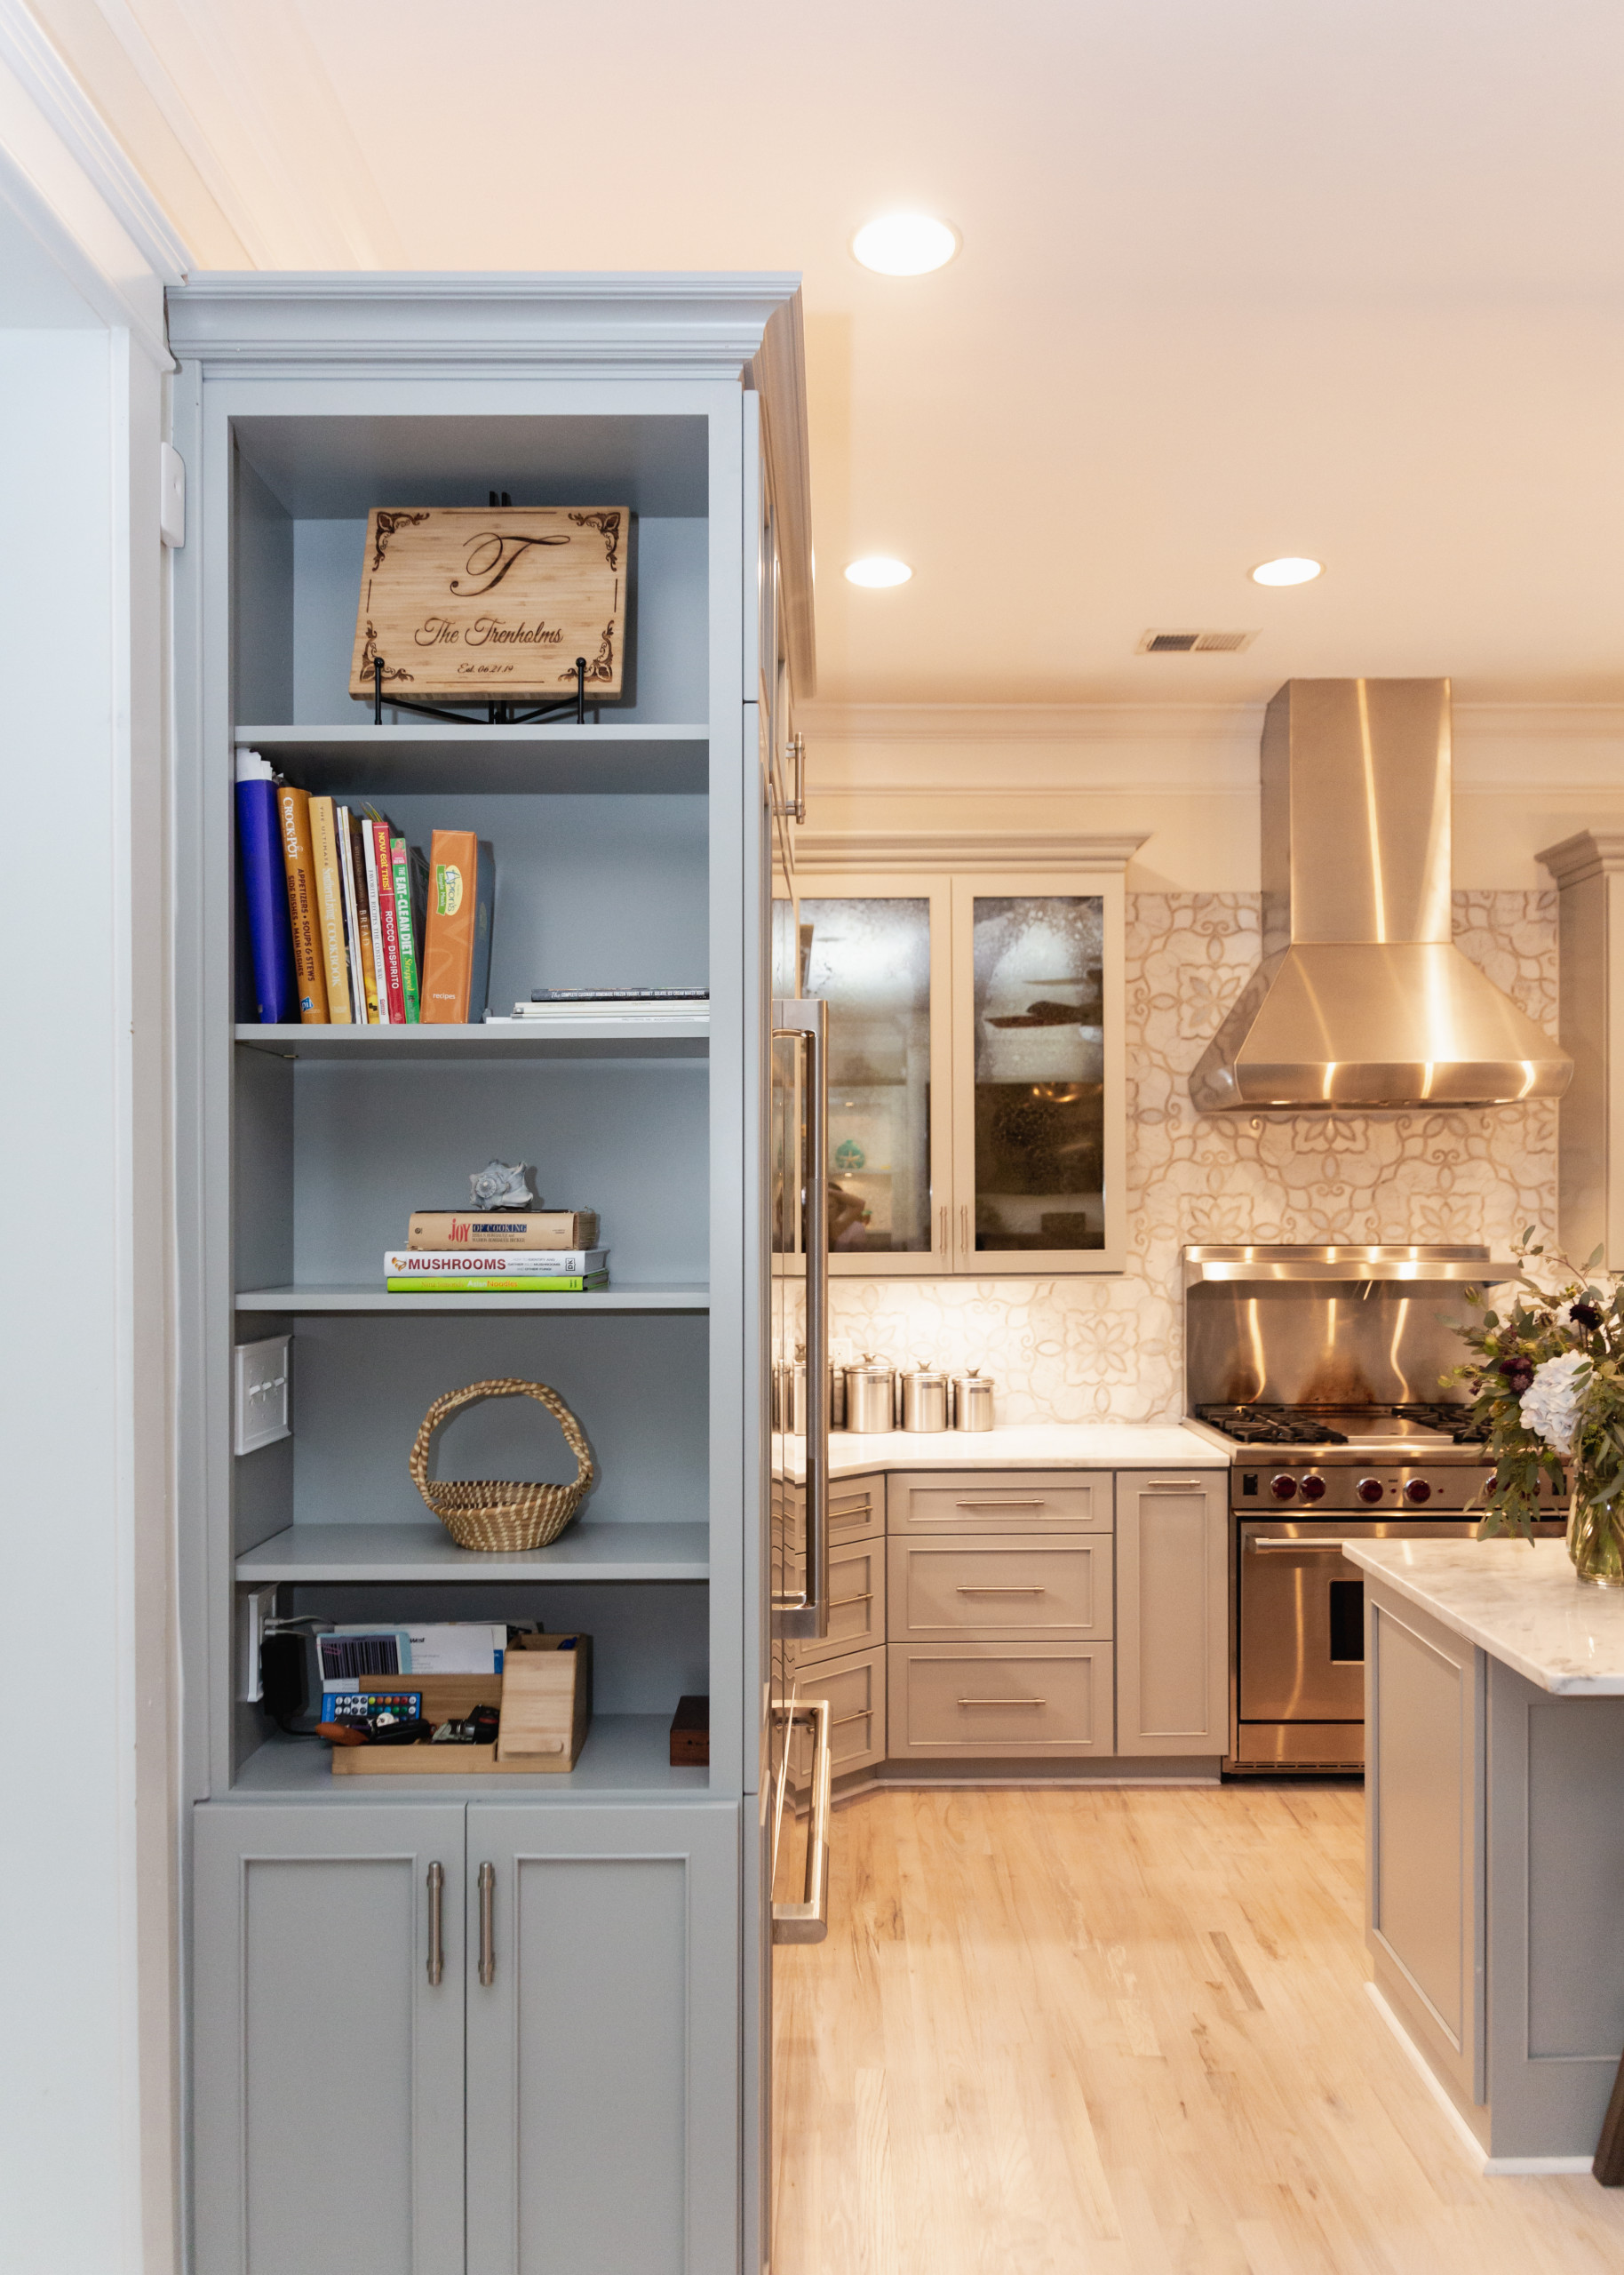 Display space upon entering the kitchen